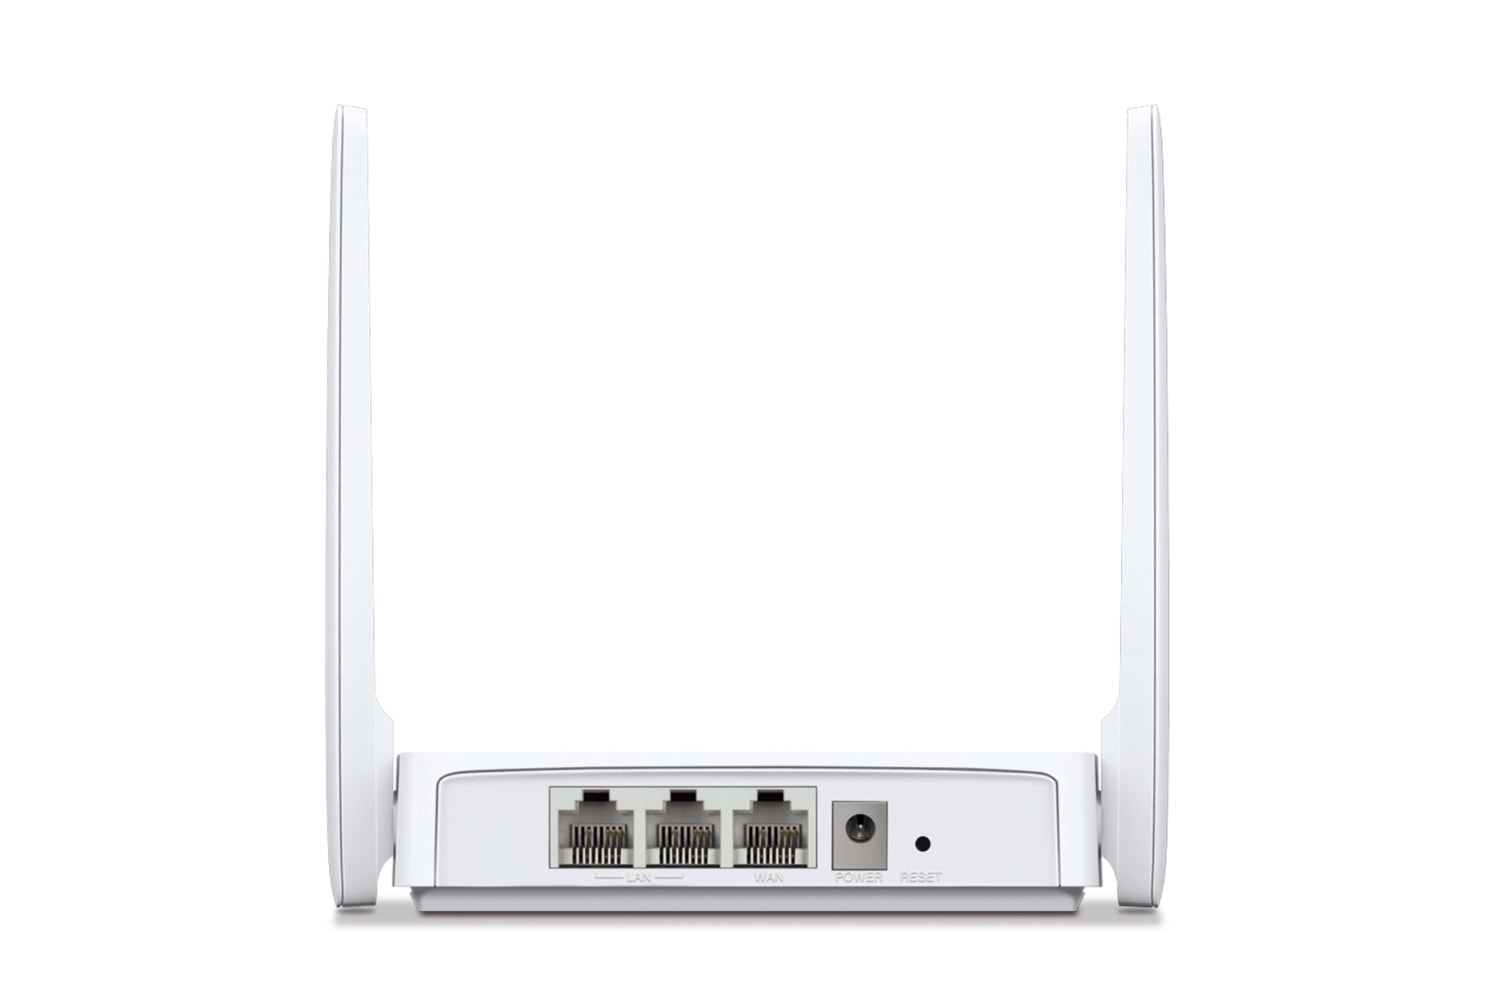 Mercusys MW302R 300Mbps Multi-Mode Wireless N Access Point & Router